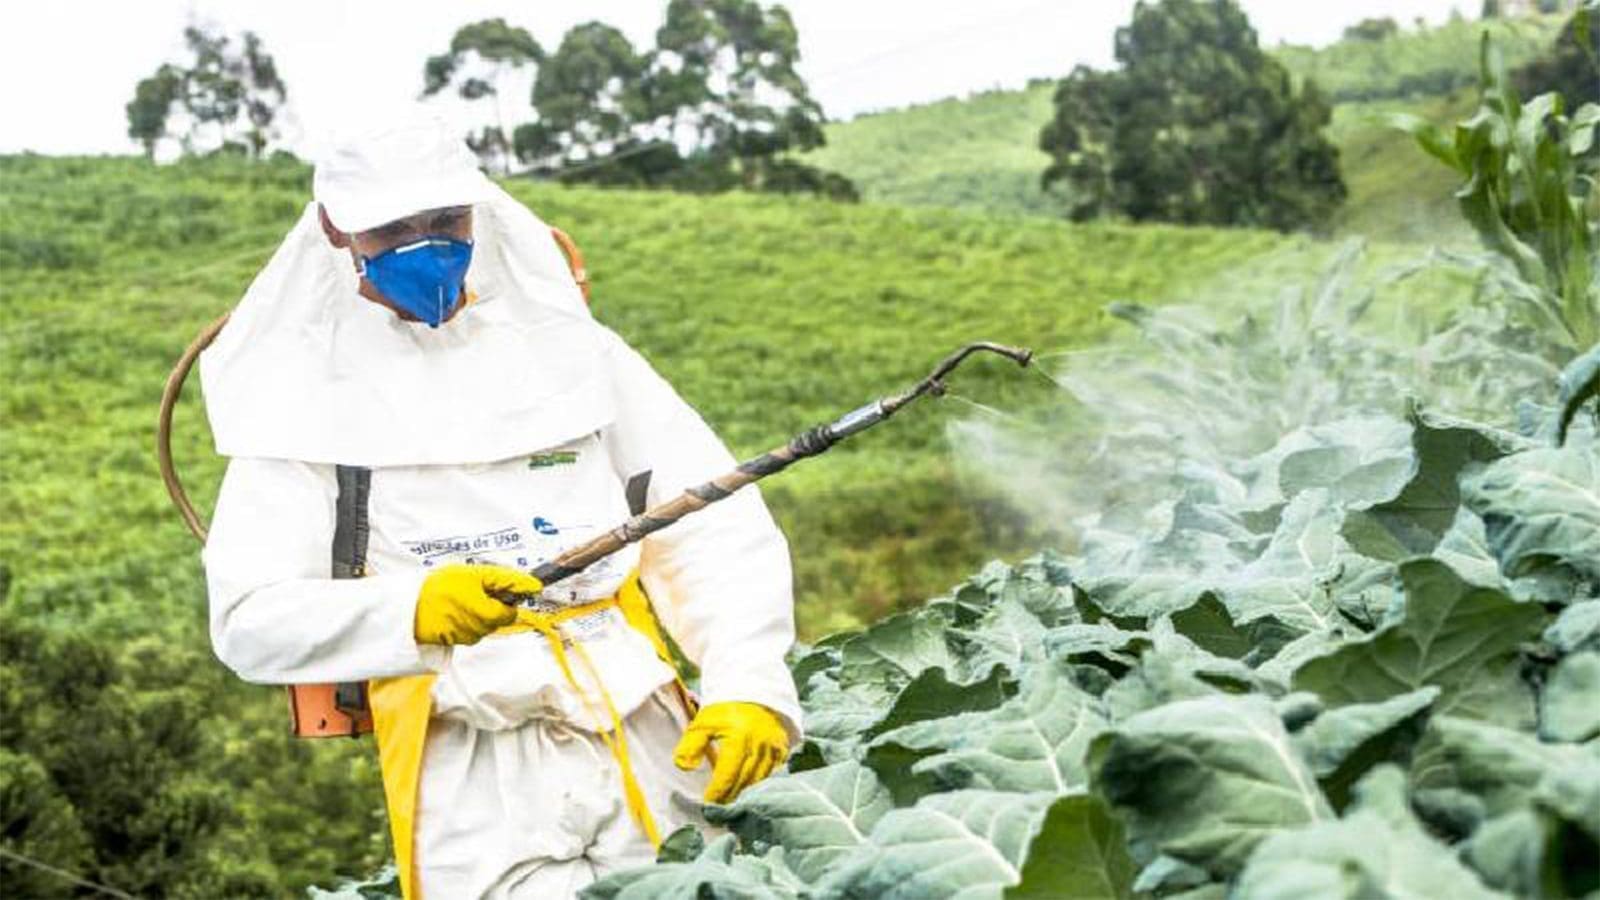 Researchers accentuate significance of pesticide use in antimicrobial resistance